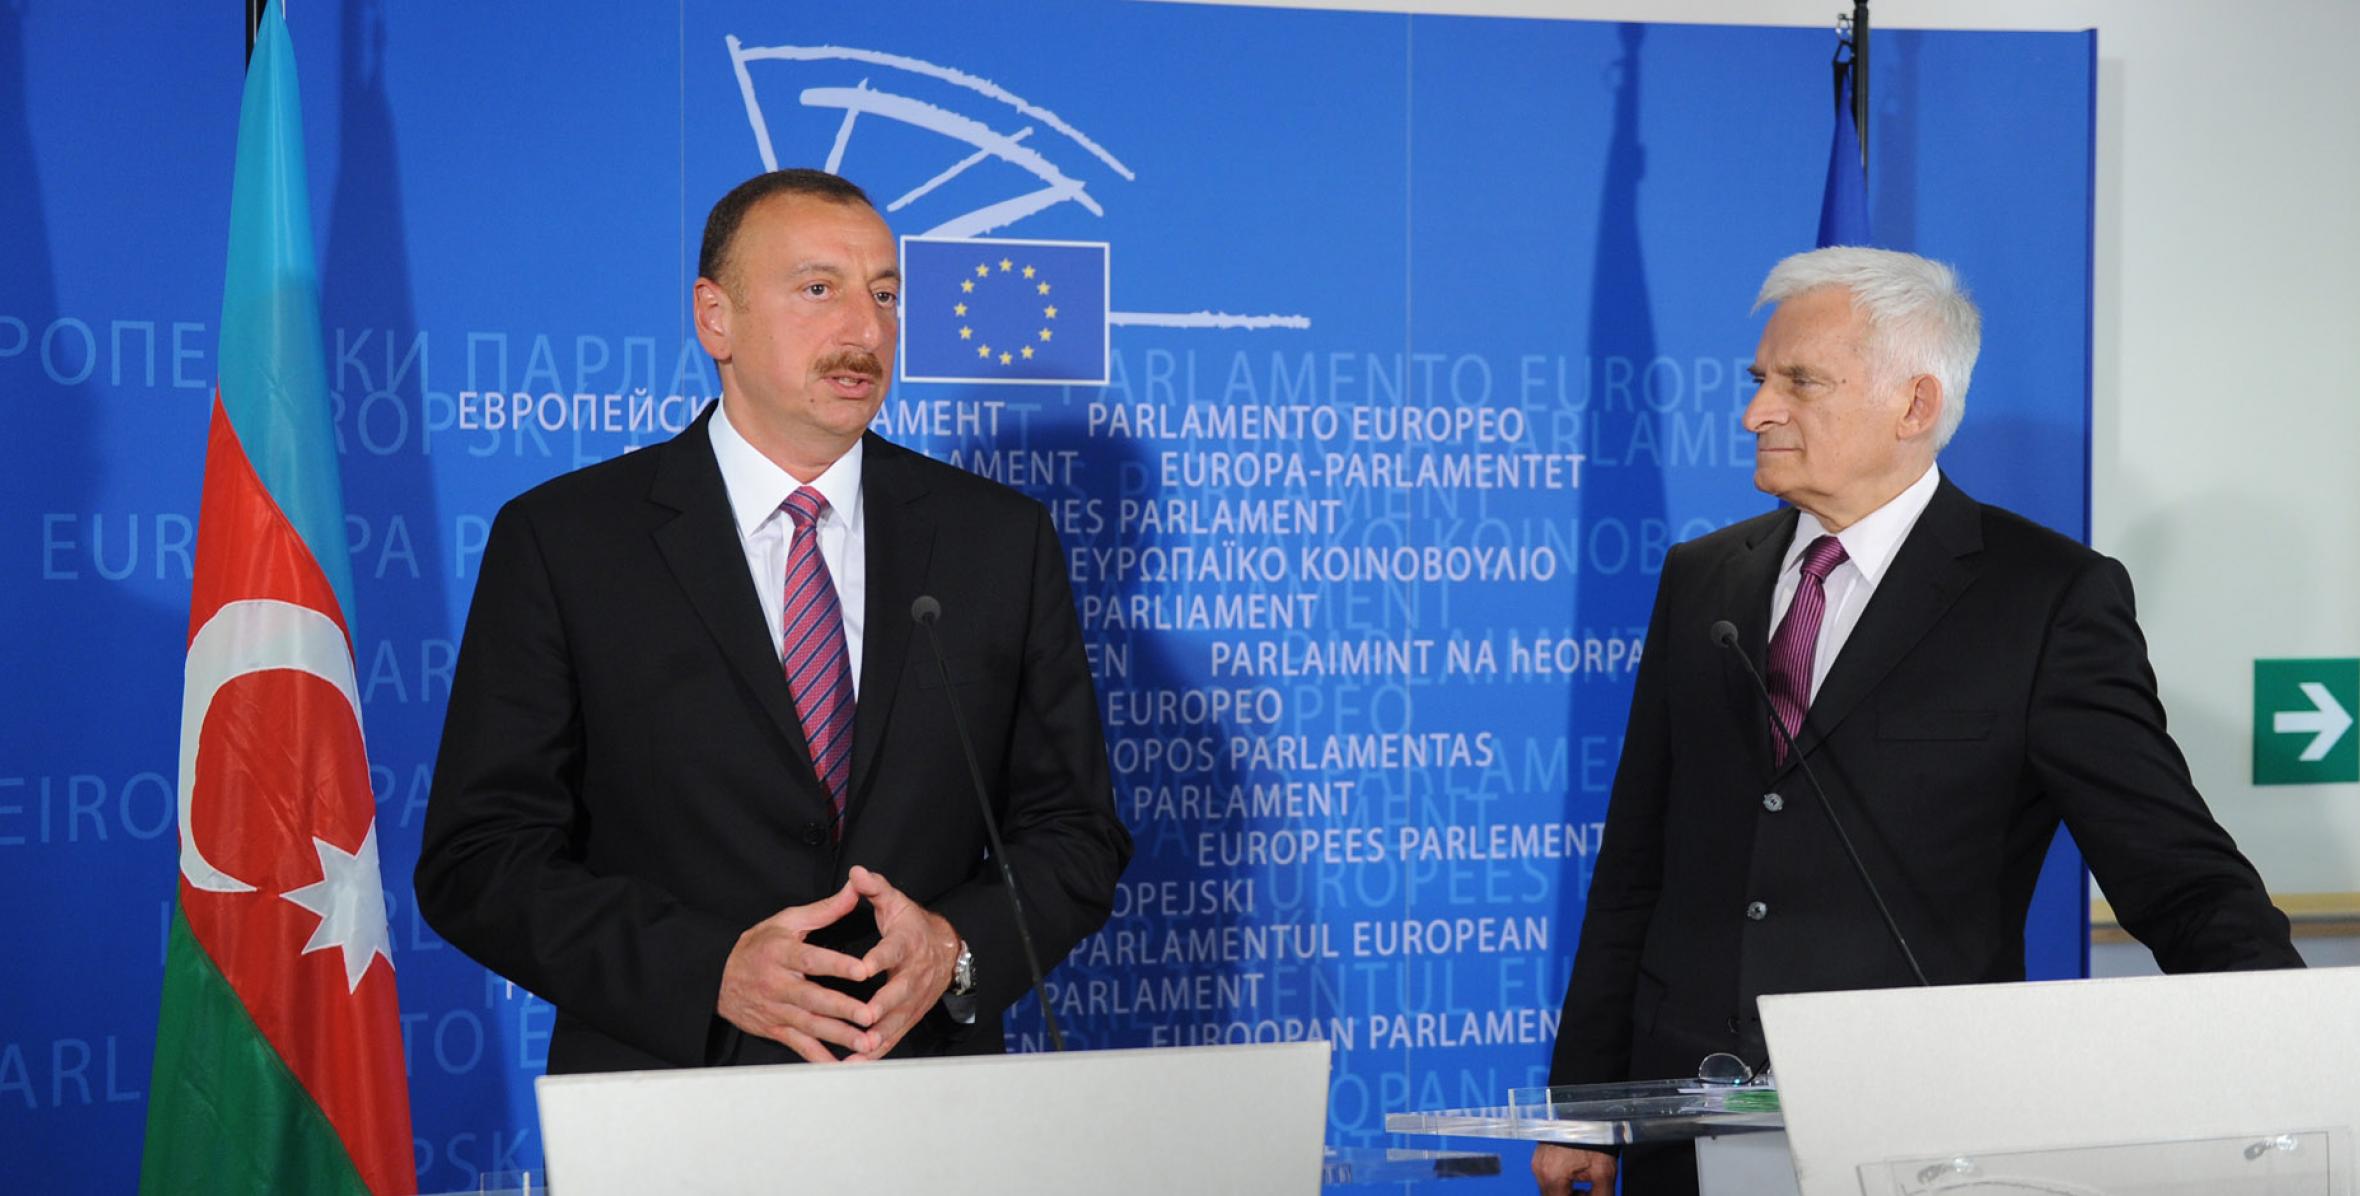 Ilham Aliyev and President of the European Parliament Jerzy Buzek held a joint press conference